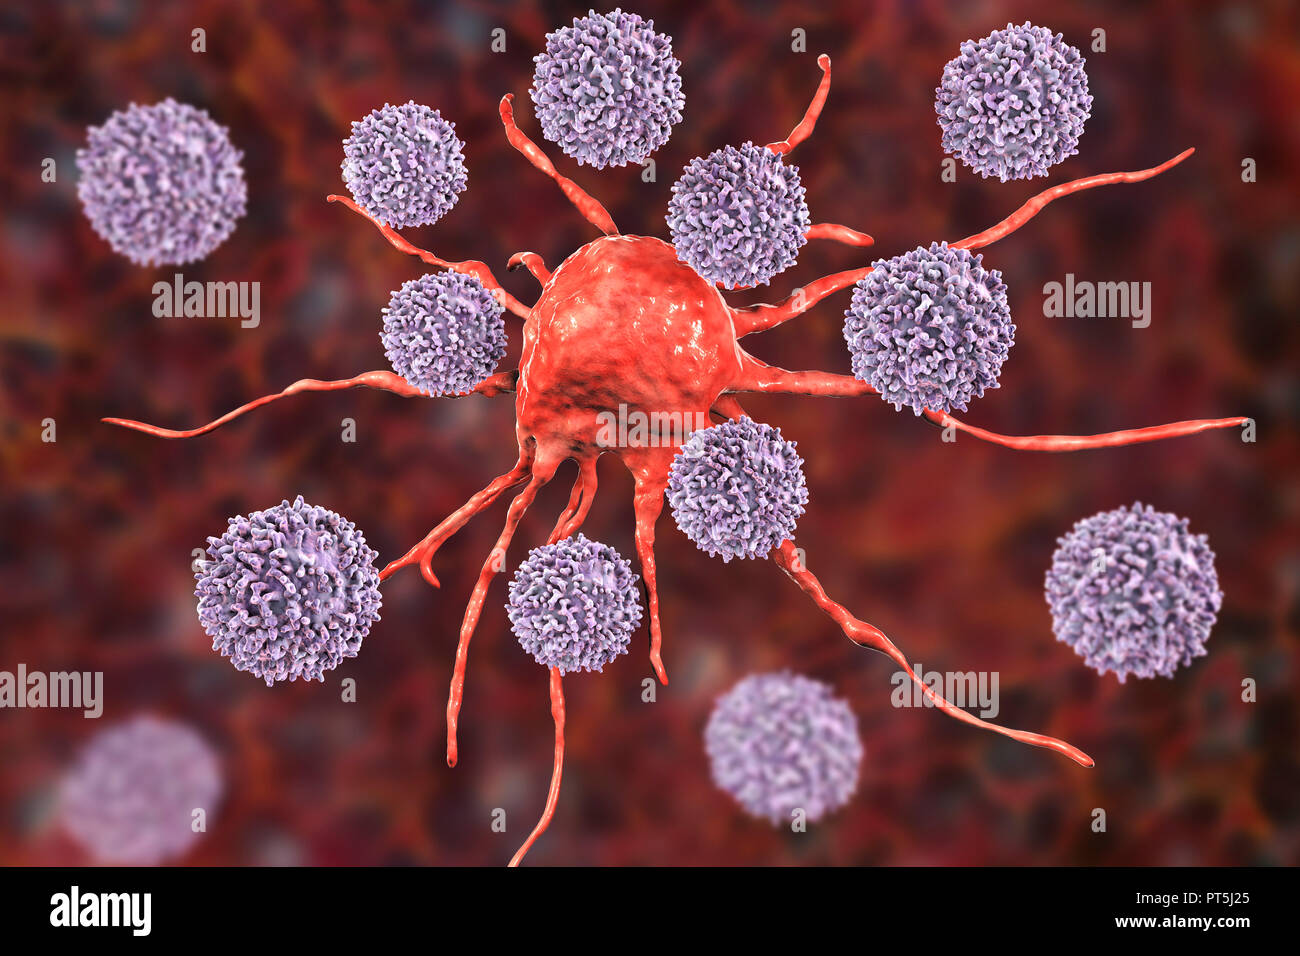 T lymphocyte cells attacking a cancer cell, computer illustration. T lymphocytes are a type of white blood cell that recognise a specific site (antigen) on the surface of cancer cells or pathogens and bind to it. Some T lymphocytes then signal for other immune system cells to eliminate the cell. The genetic changes that cause a cell to become cancerous lead to the presentation of tumour antigens on the cell's surface. Stock Photo